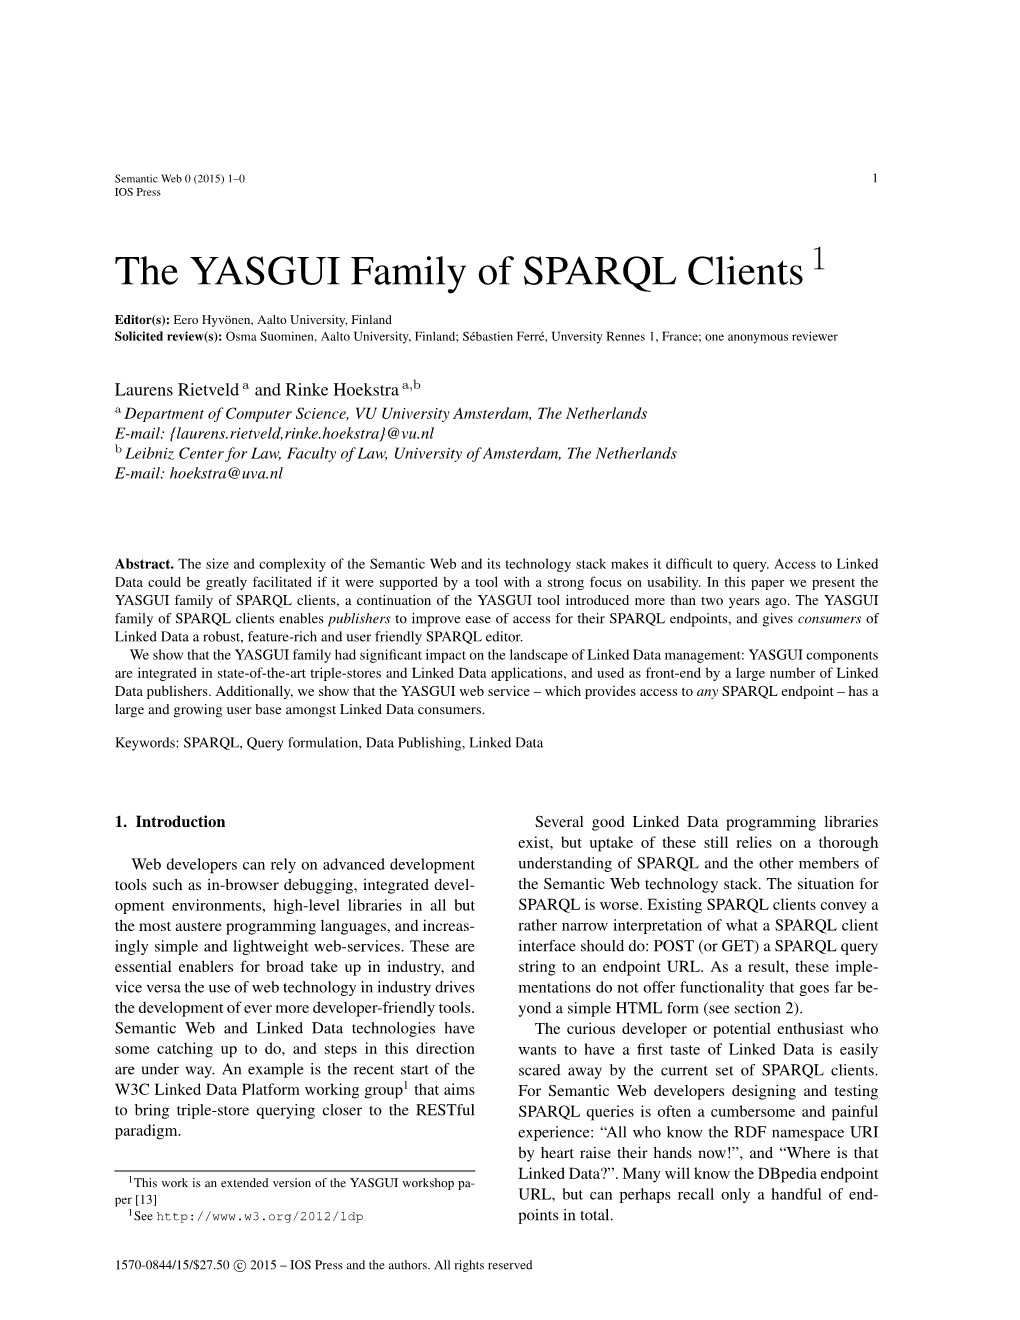 The YASGUI Family of SPARQL Clients 1